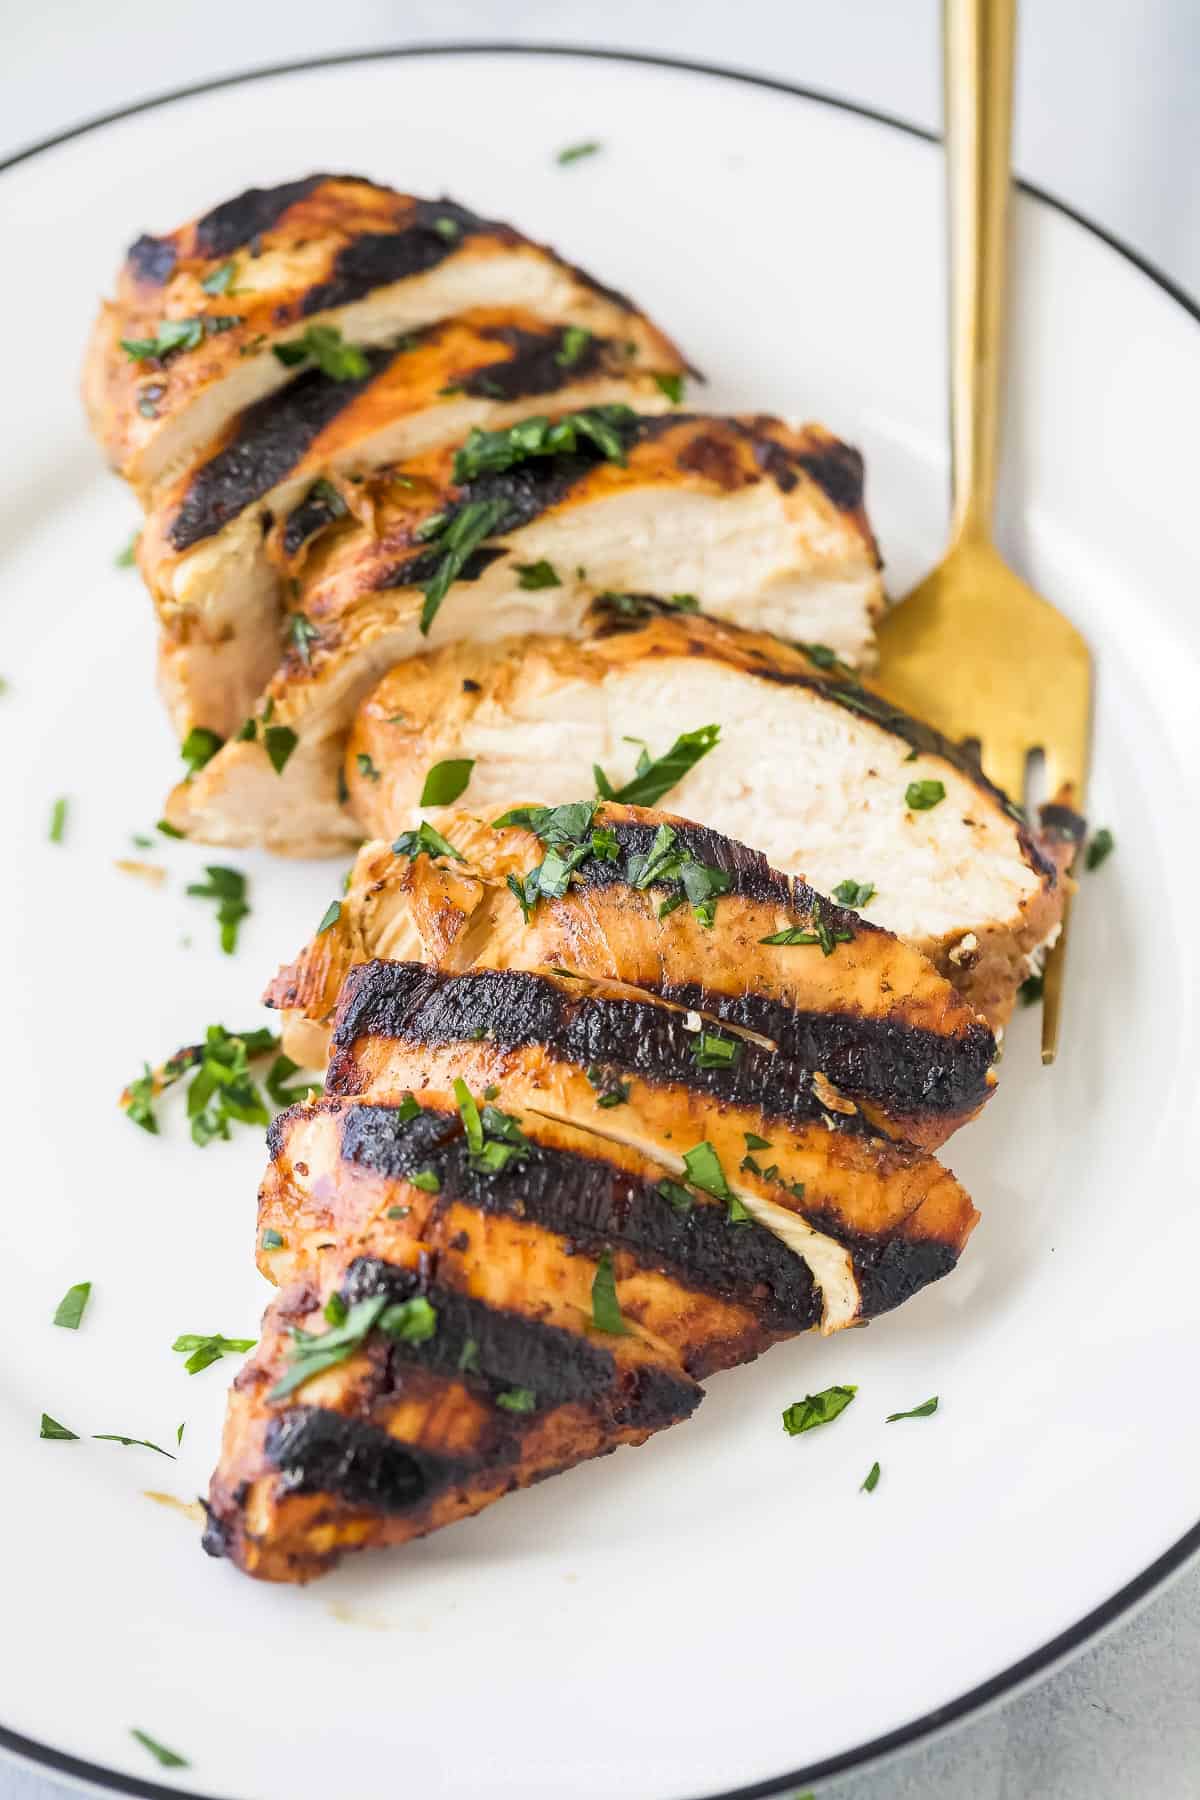 A grilled chicken breast cut into pieces on a plate with a golden fork